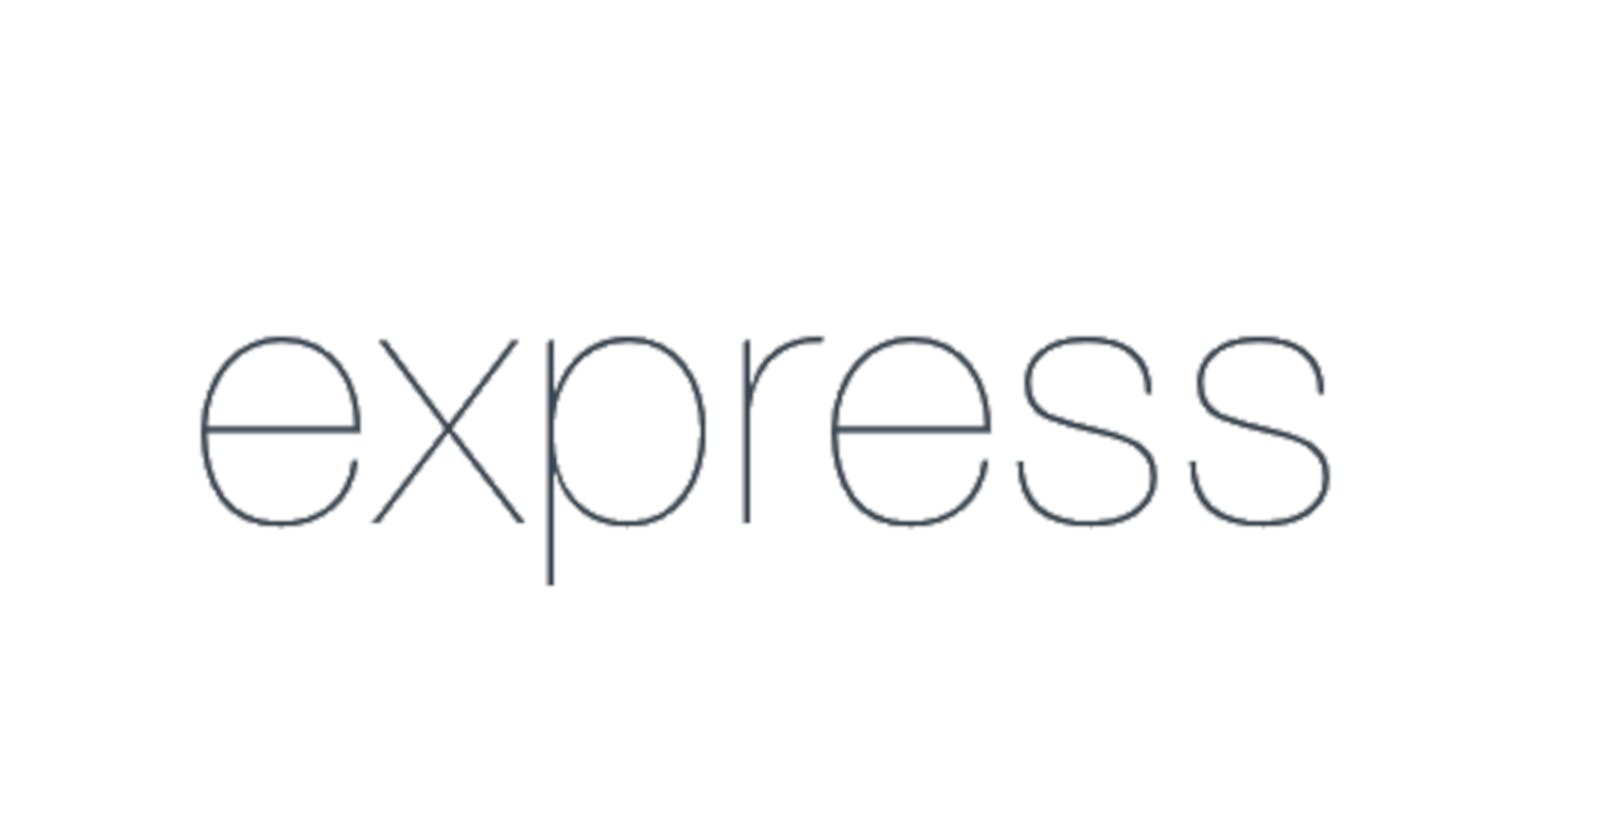 What Is A Route In Express: Simplest Explanation